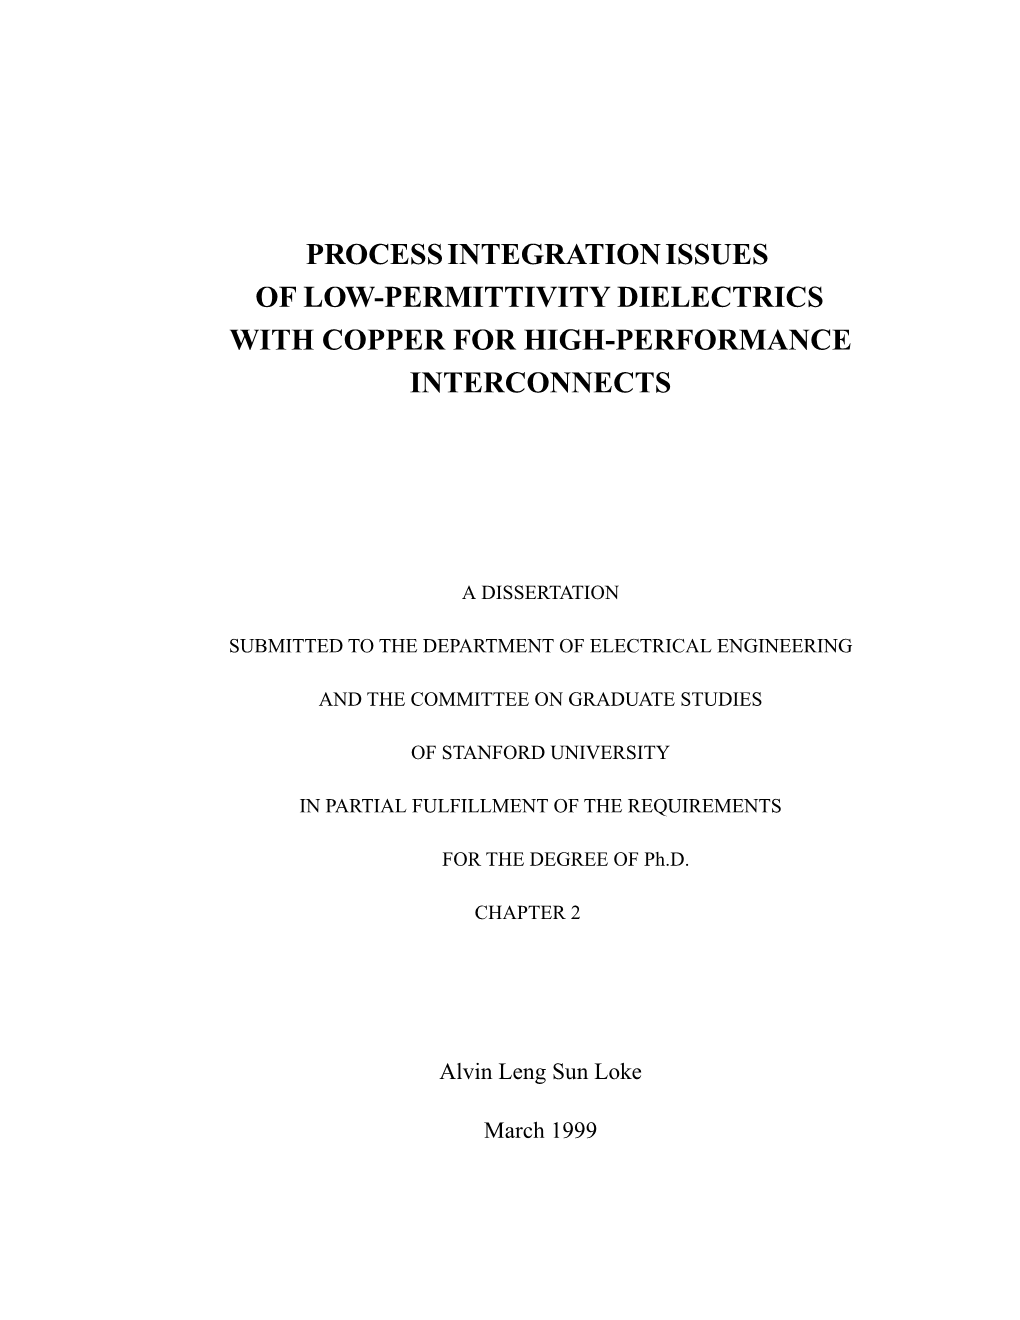 "Process Integration Issues of Low-Permittivity Dielectrics with Copper for High-Performance Interconnects", Chapter